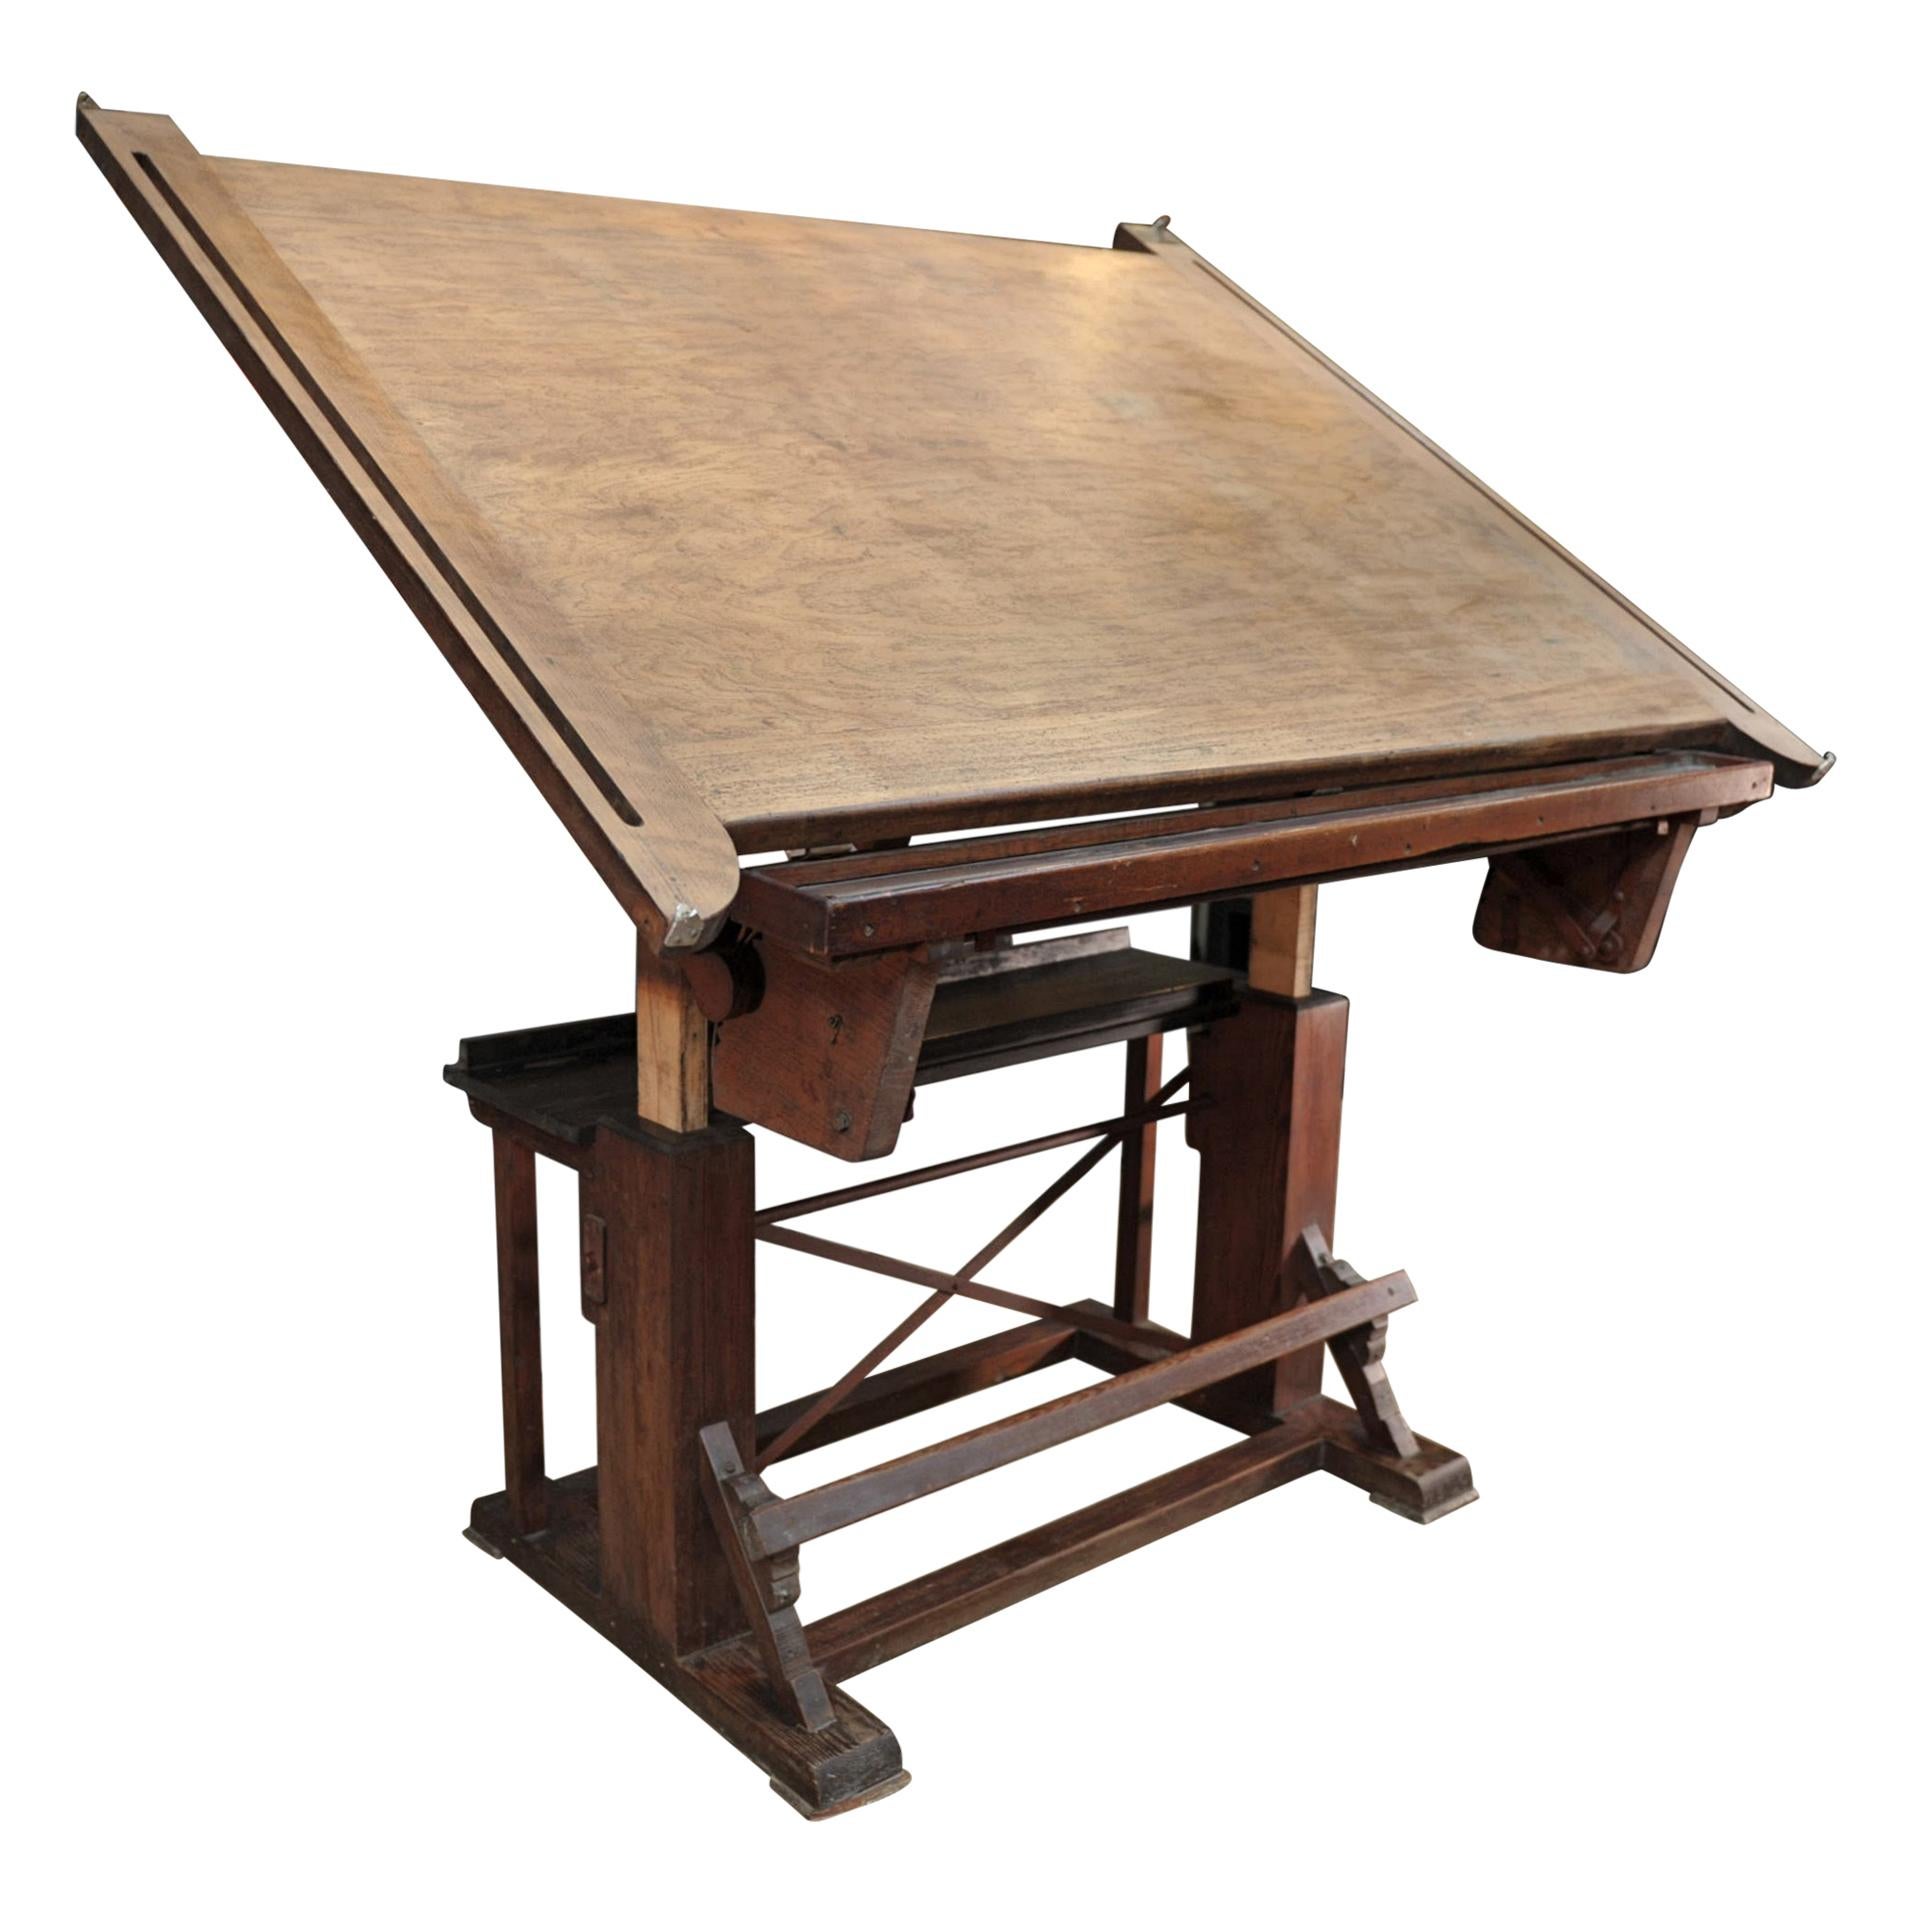 Adjustable Architect's Drafting Table or Writing Desk, circa 1920s